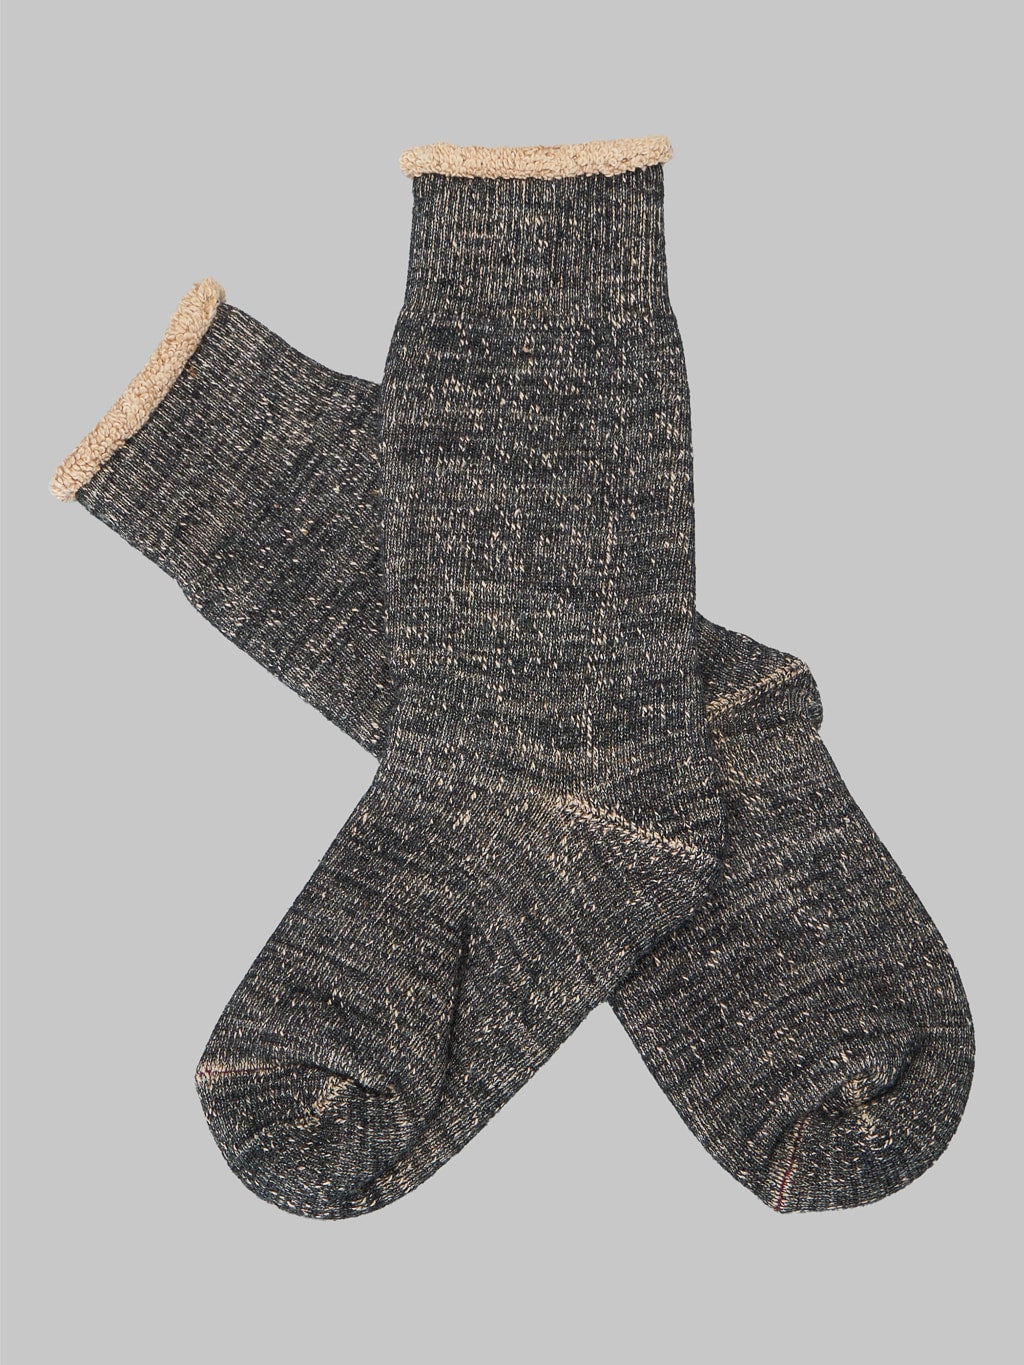 rototo double face crew socks black brown made in japan